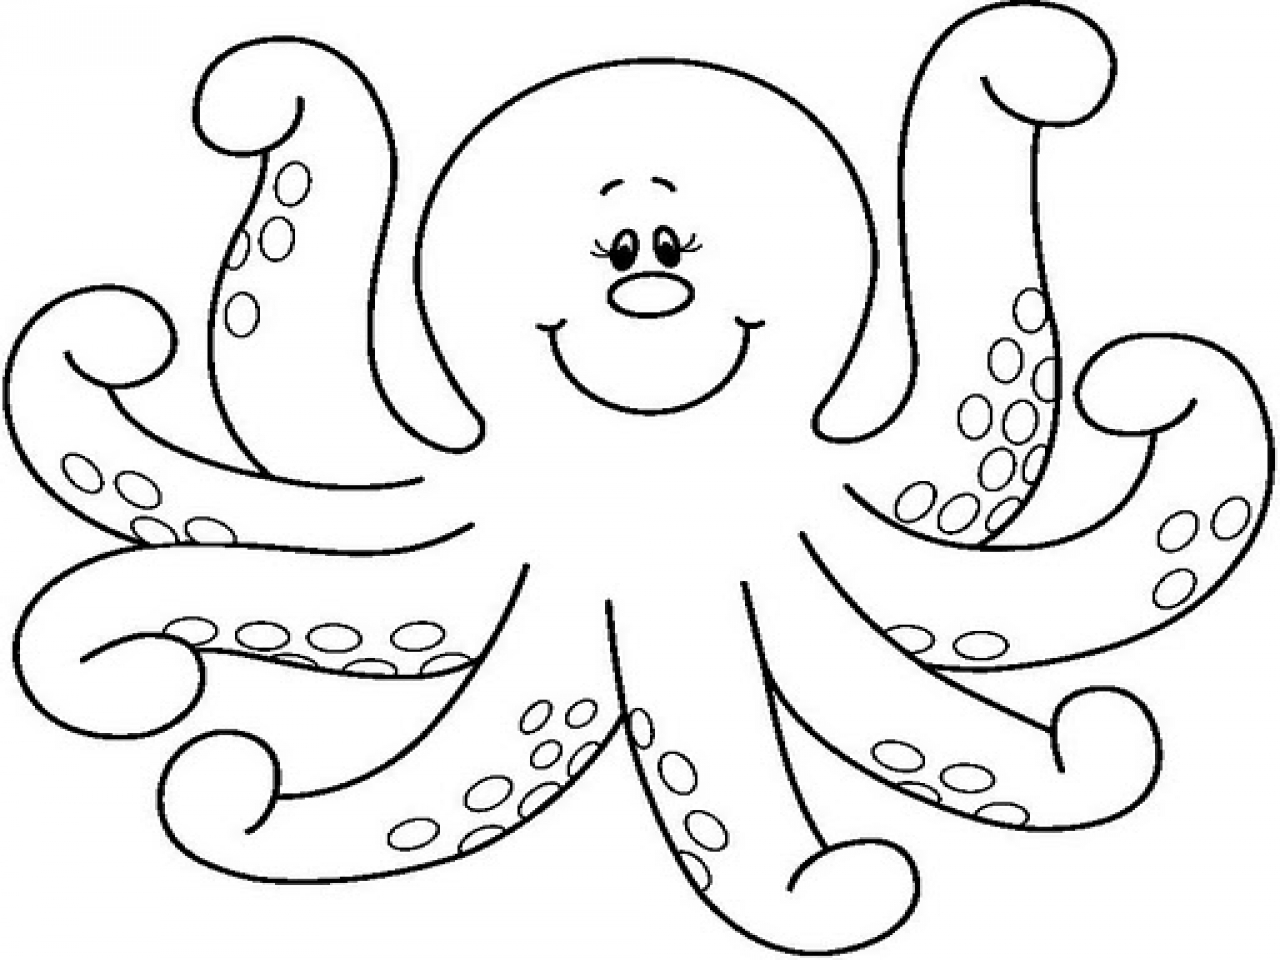 Free Octopus Clip Art Black And White, Download Free Octopus Clip Art ...